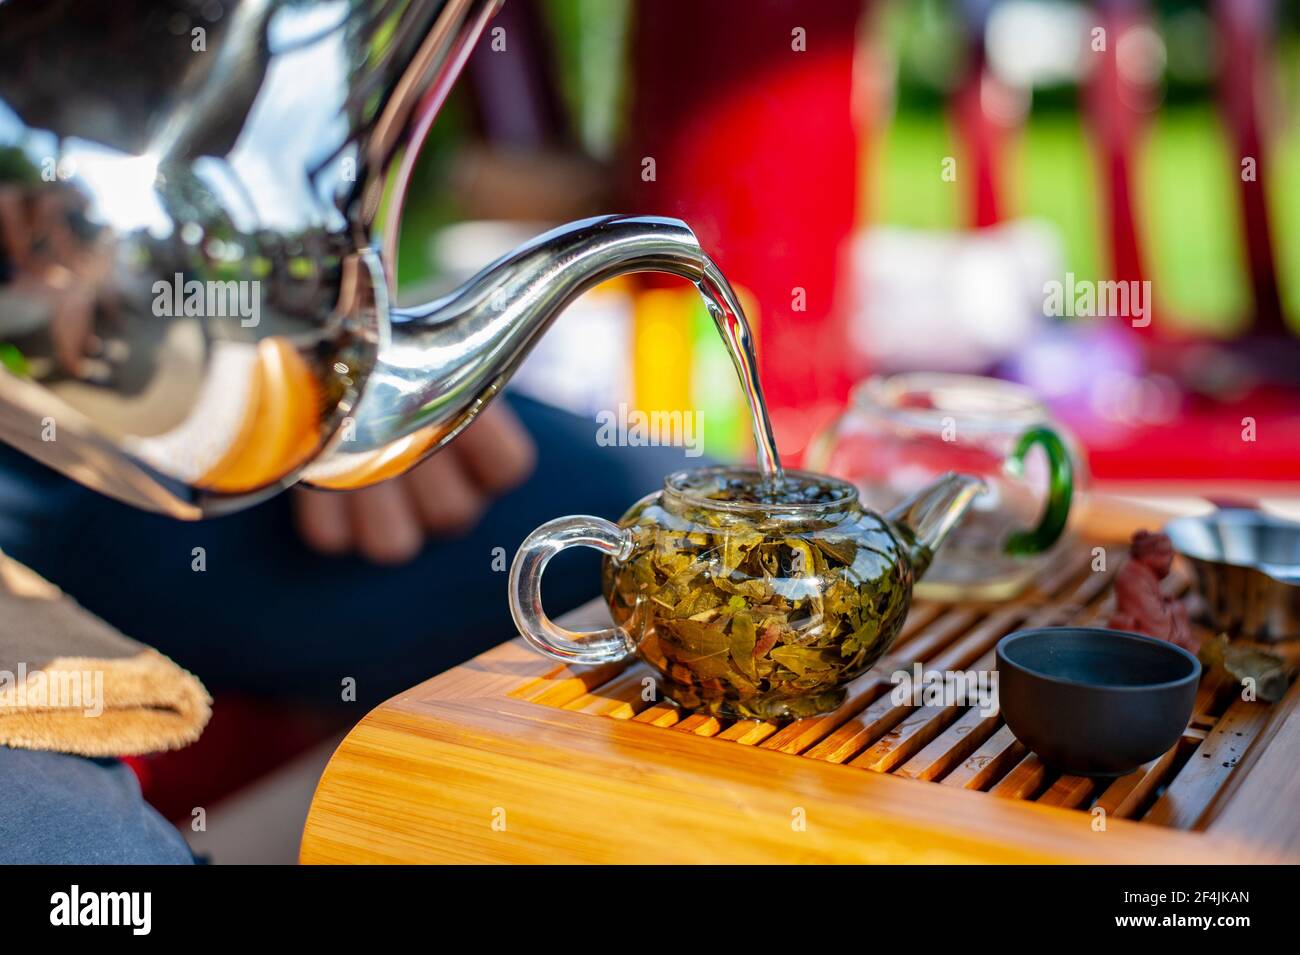 https://c8.alamy.com/comp/2F4JKAN/traditional-chinese-tea-ceremony-hot-water-pouring-into-a-glass-teapot-with-green-tea-leaves-of-chinese-oolong-tea-in-it-2F4JKAN.jpg